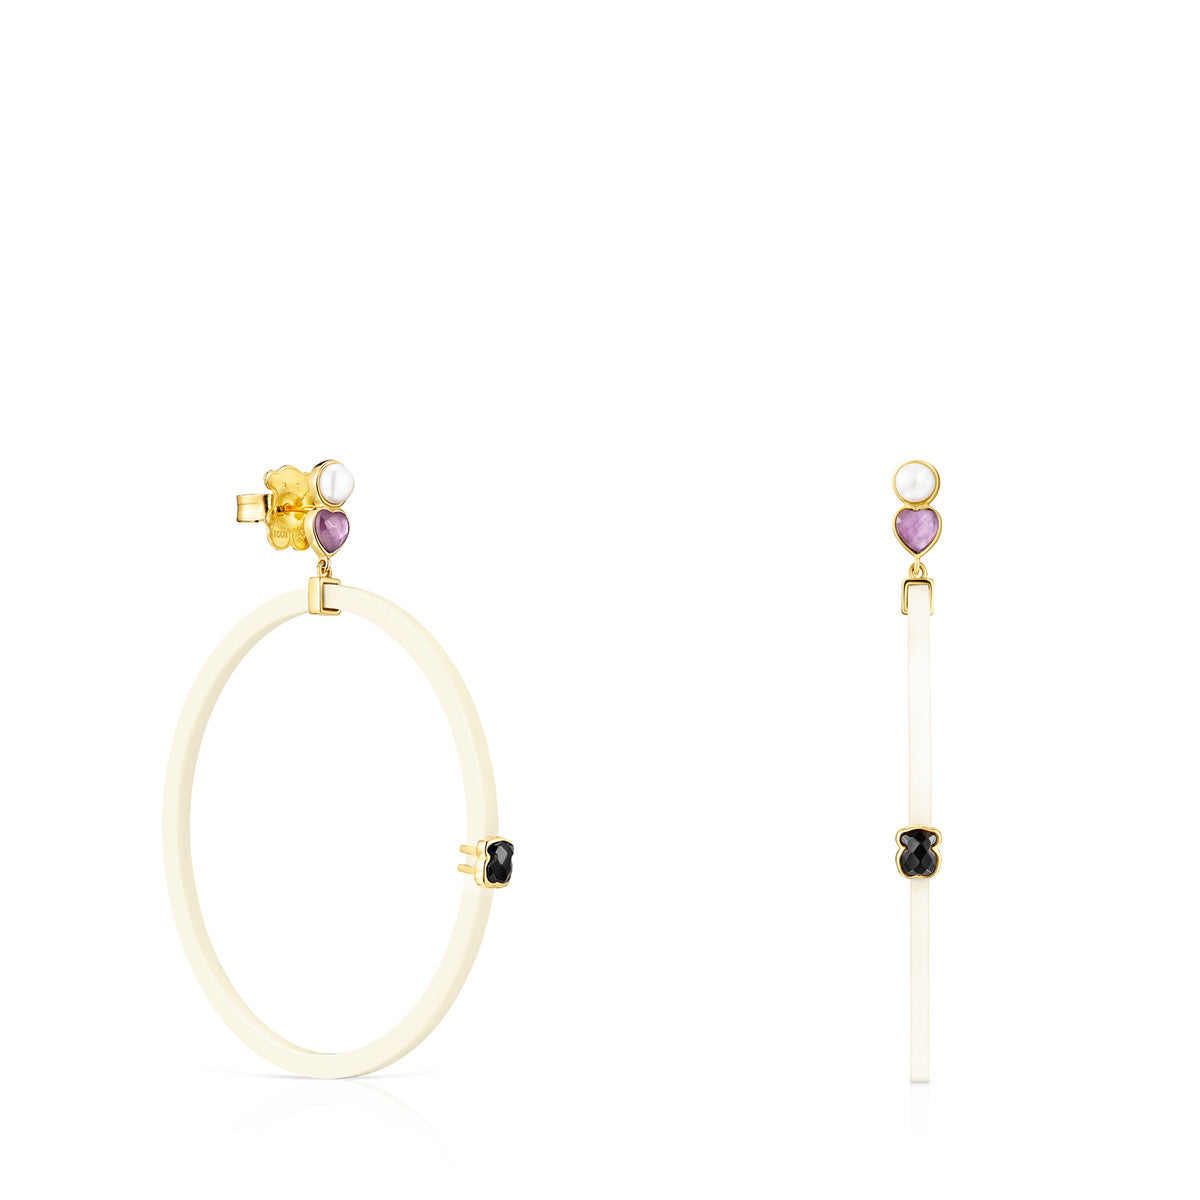 Tous Glory Earrings in Resin with Gold Vermeil and Gemstones 918593530